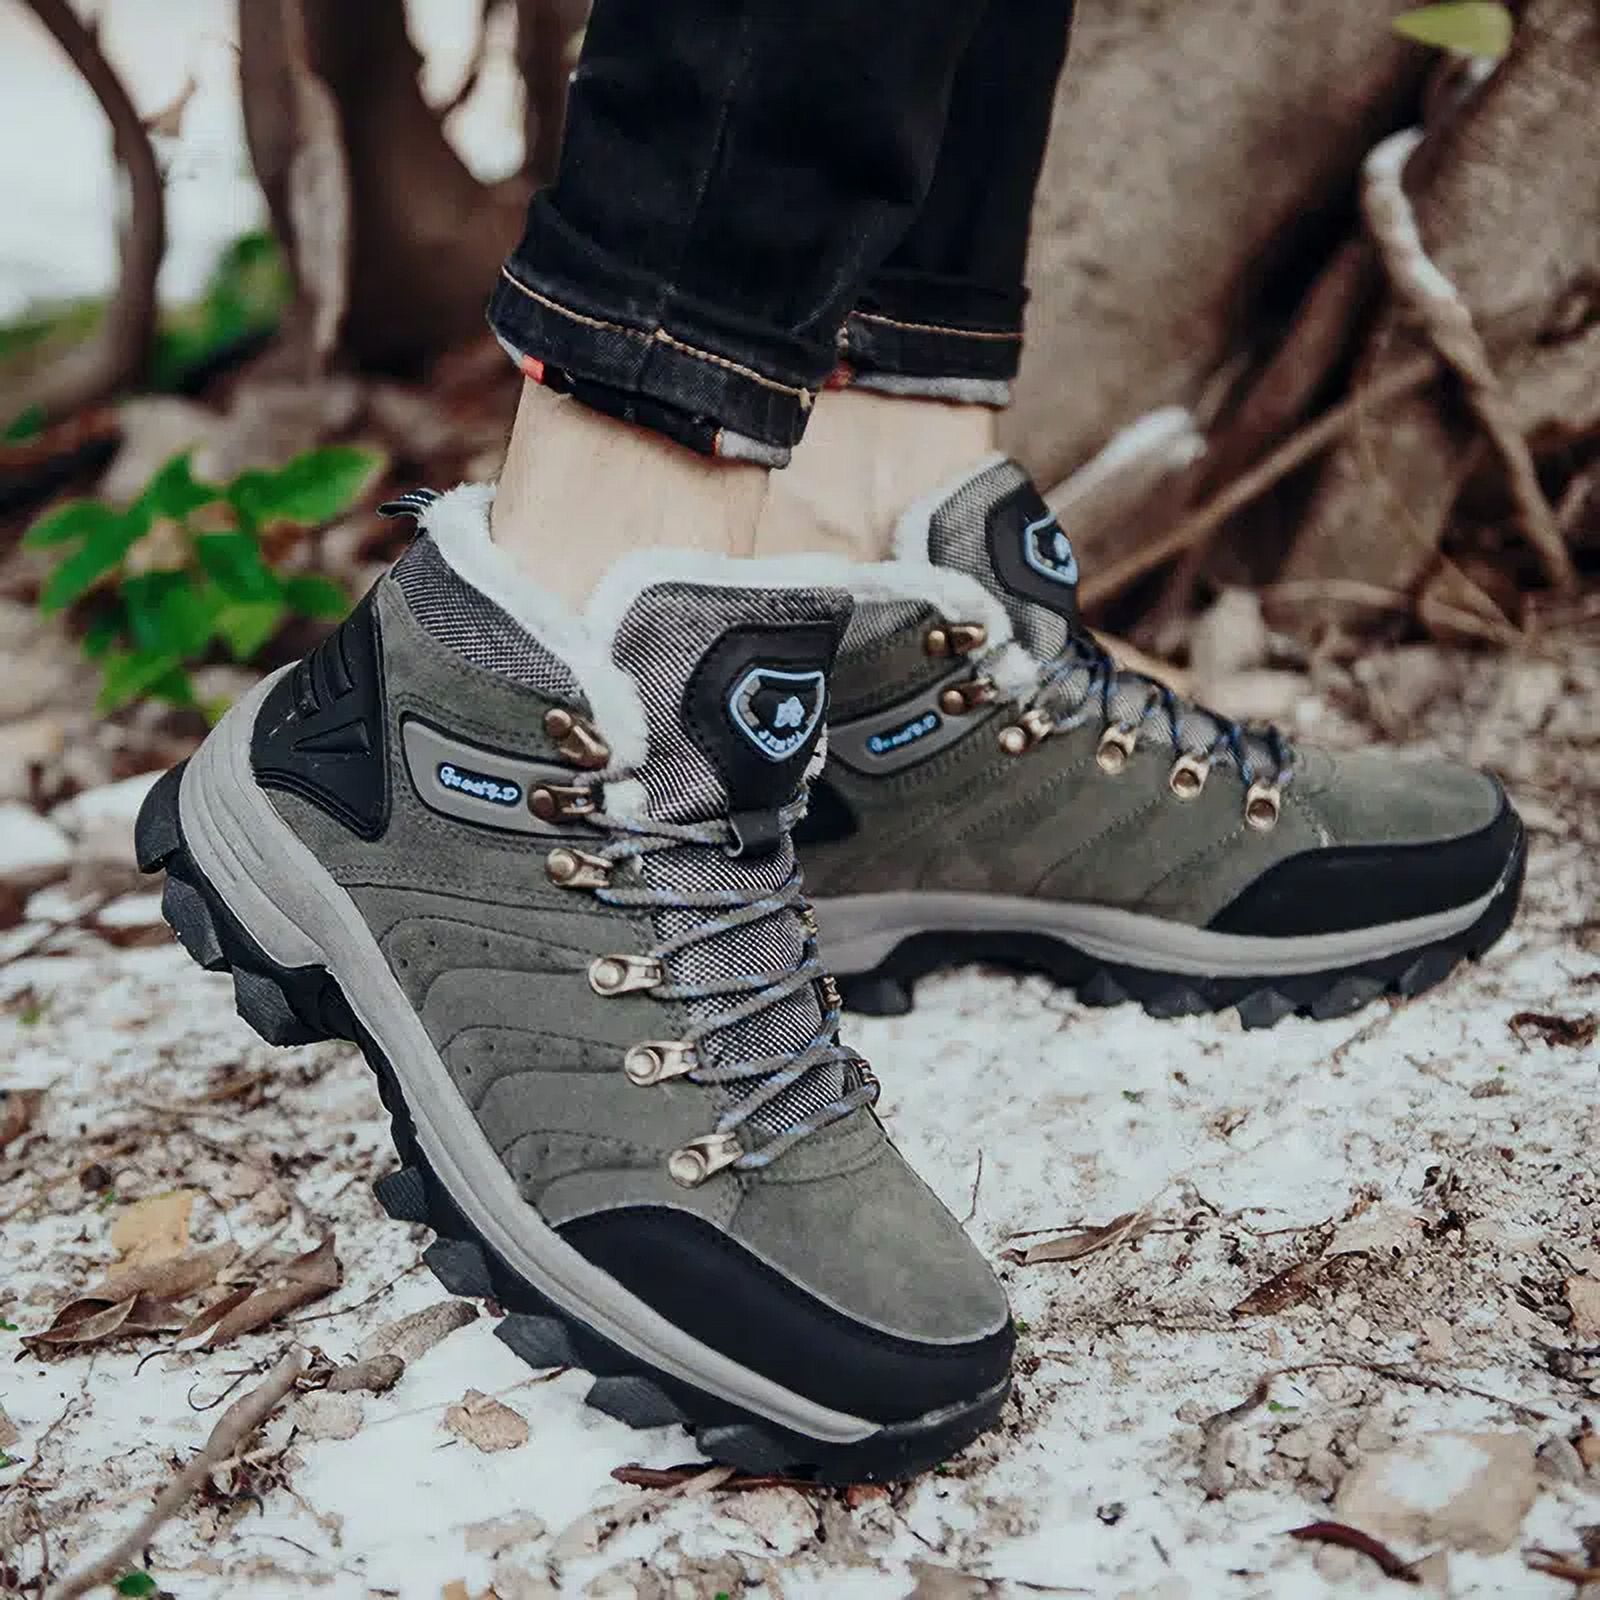 Blundstone All-Terrain Thermal Winter Boots Review